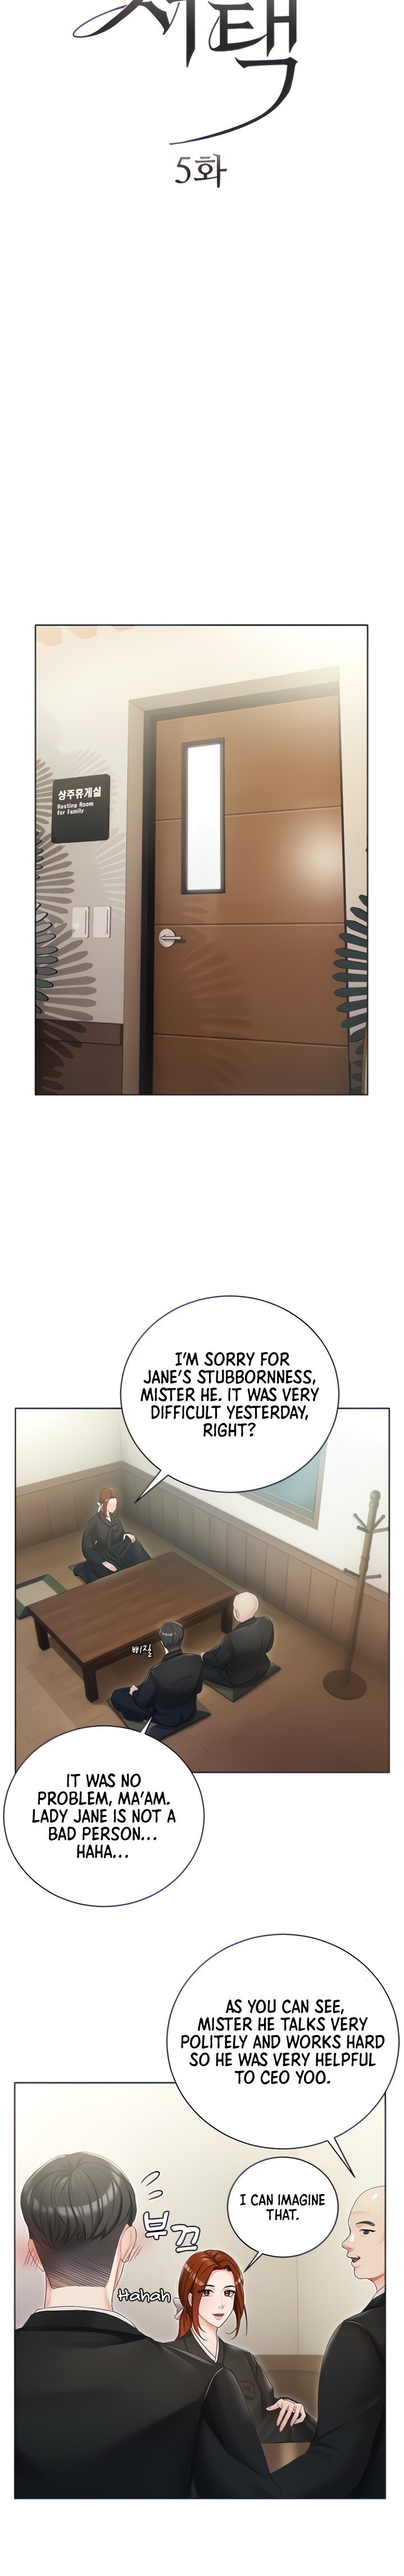 Hyeonjung’s Residence - Chapter 5 Page 5